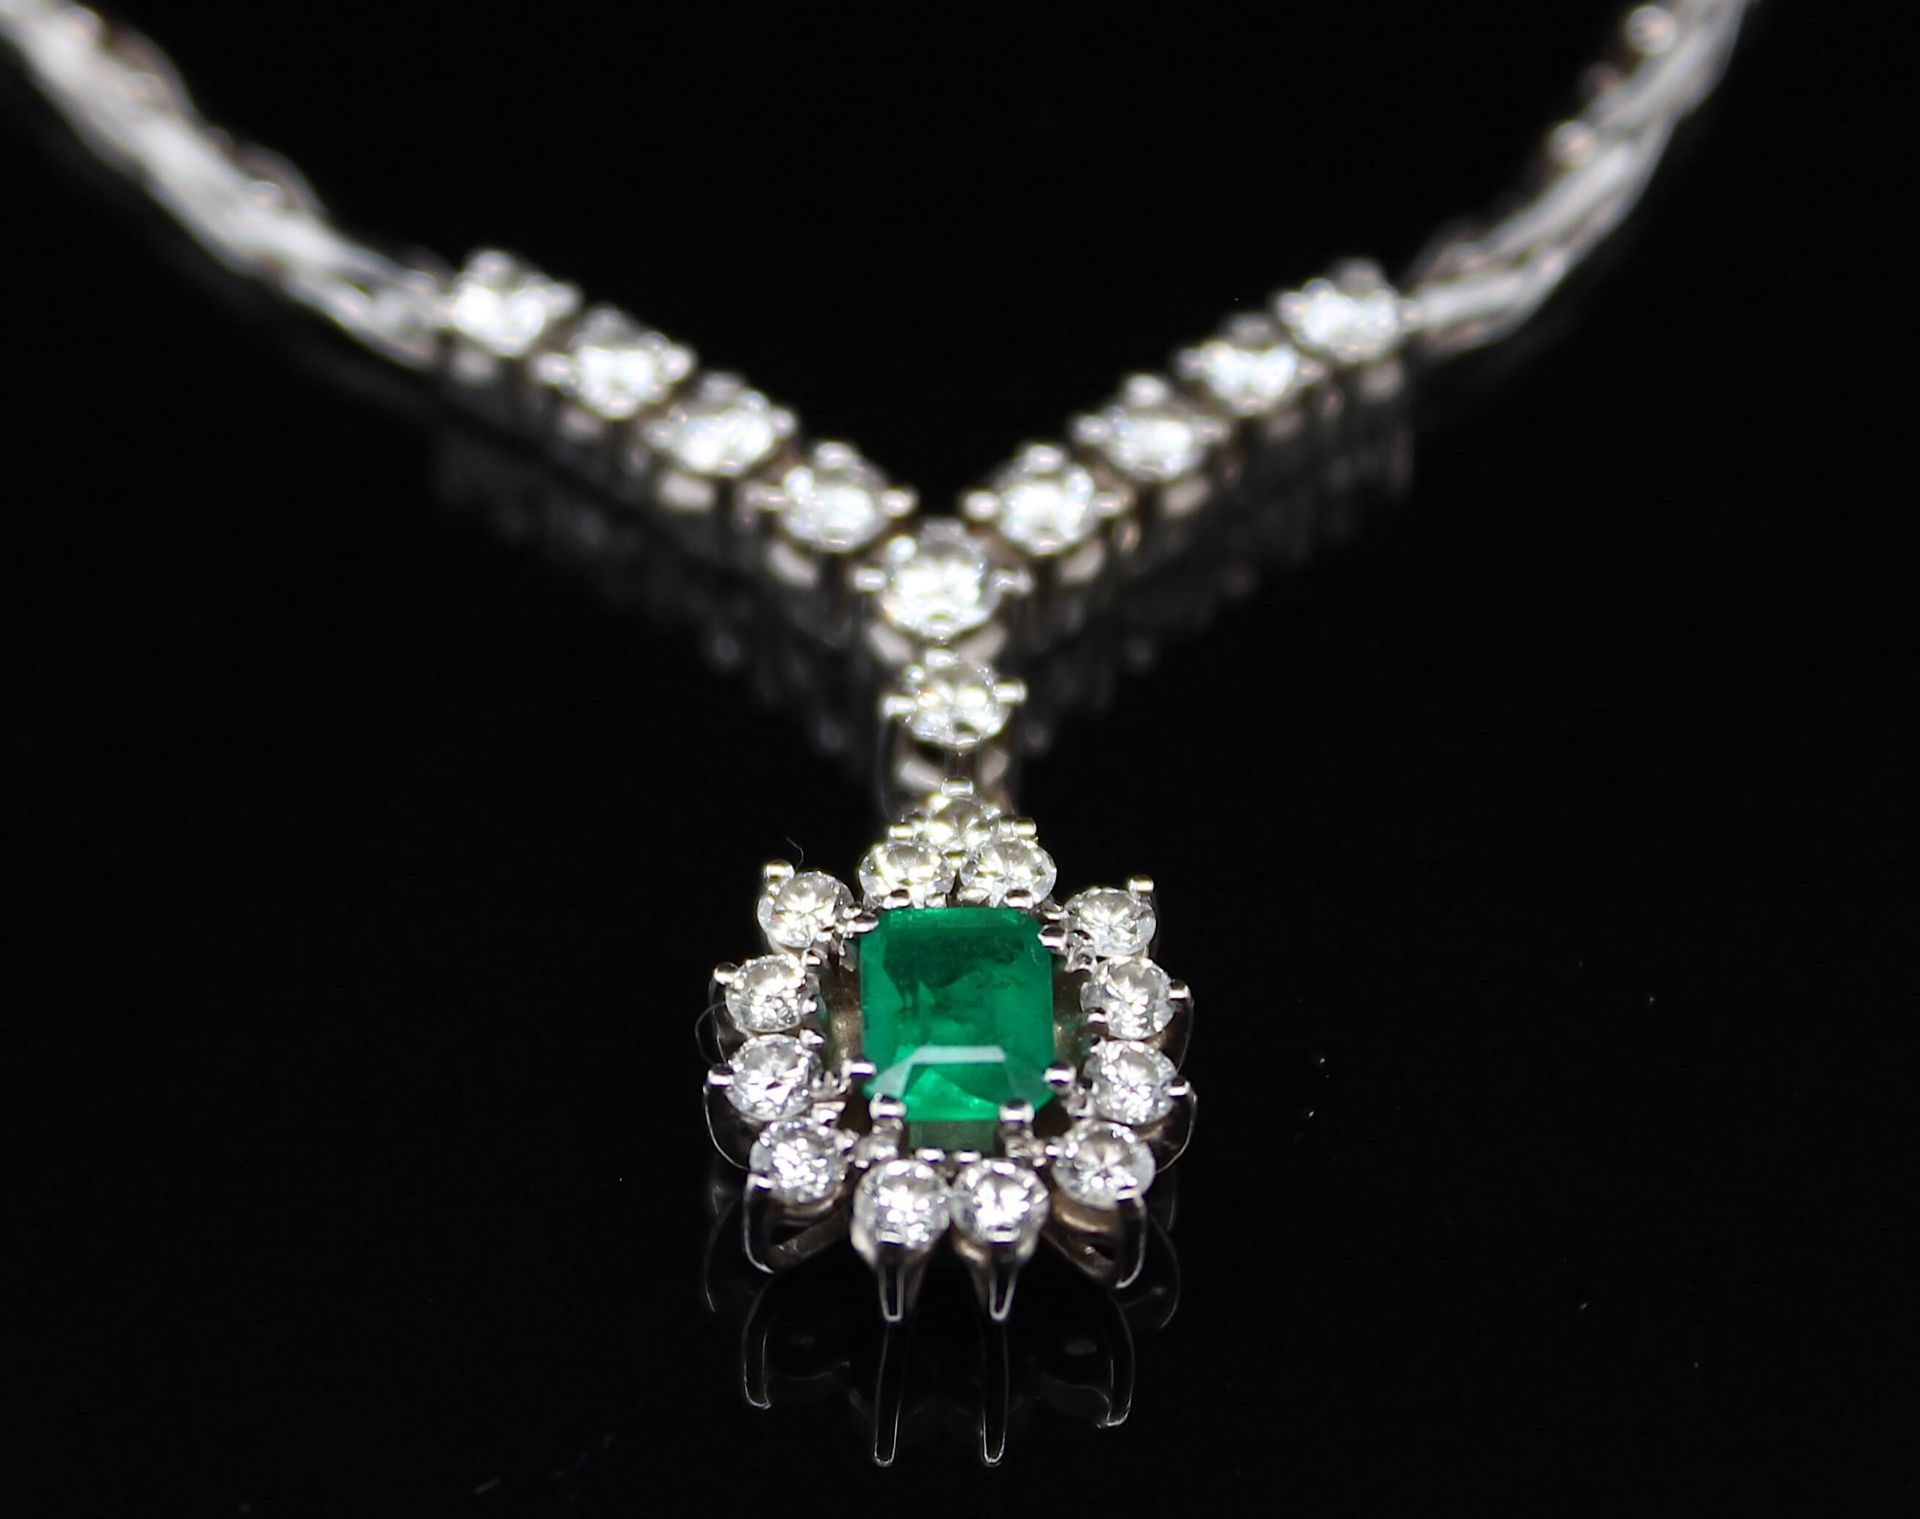 Necklace with a total of ca. 0.90 ct brilliants and 1 emerald